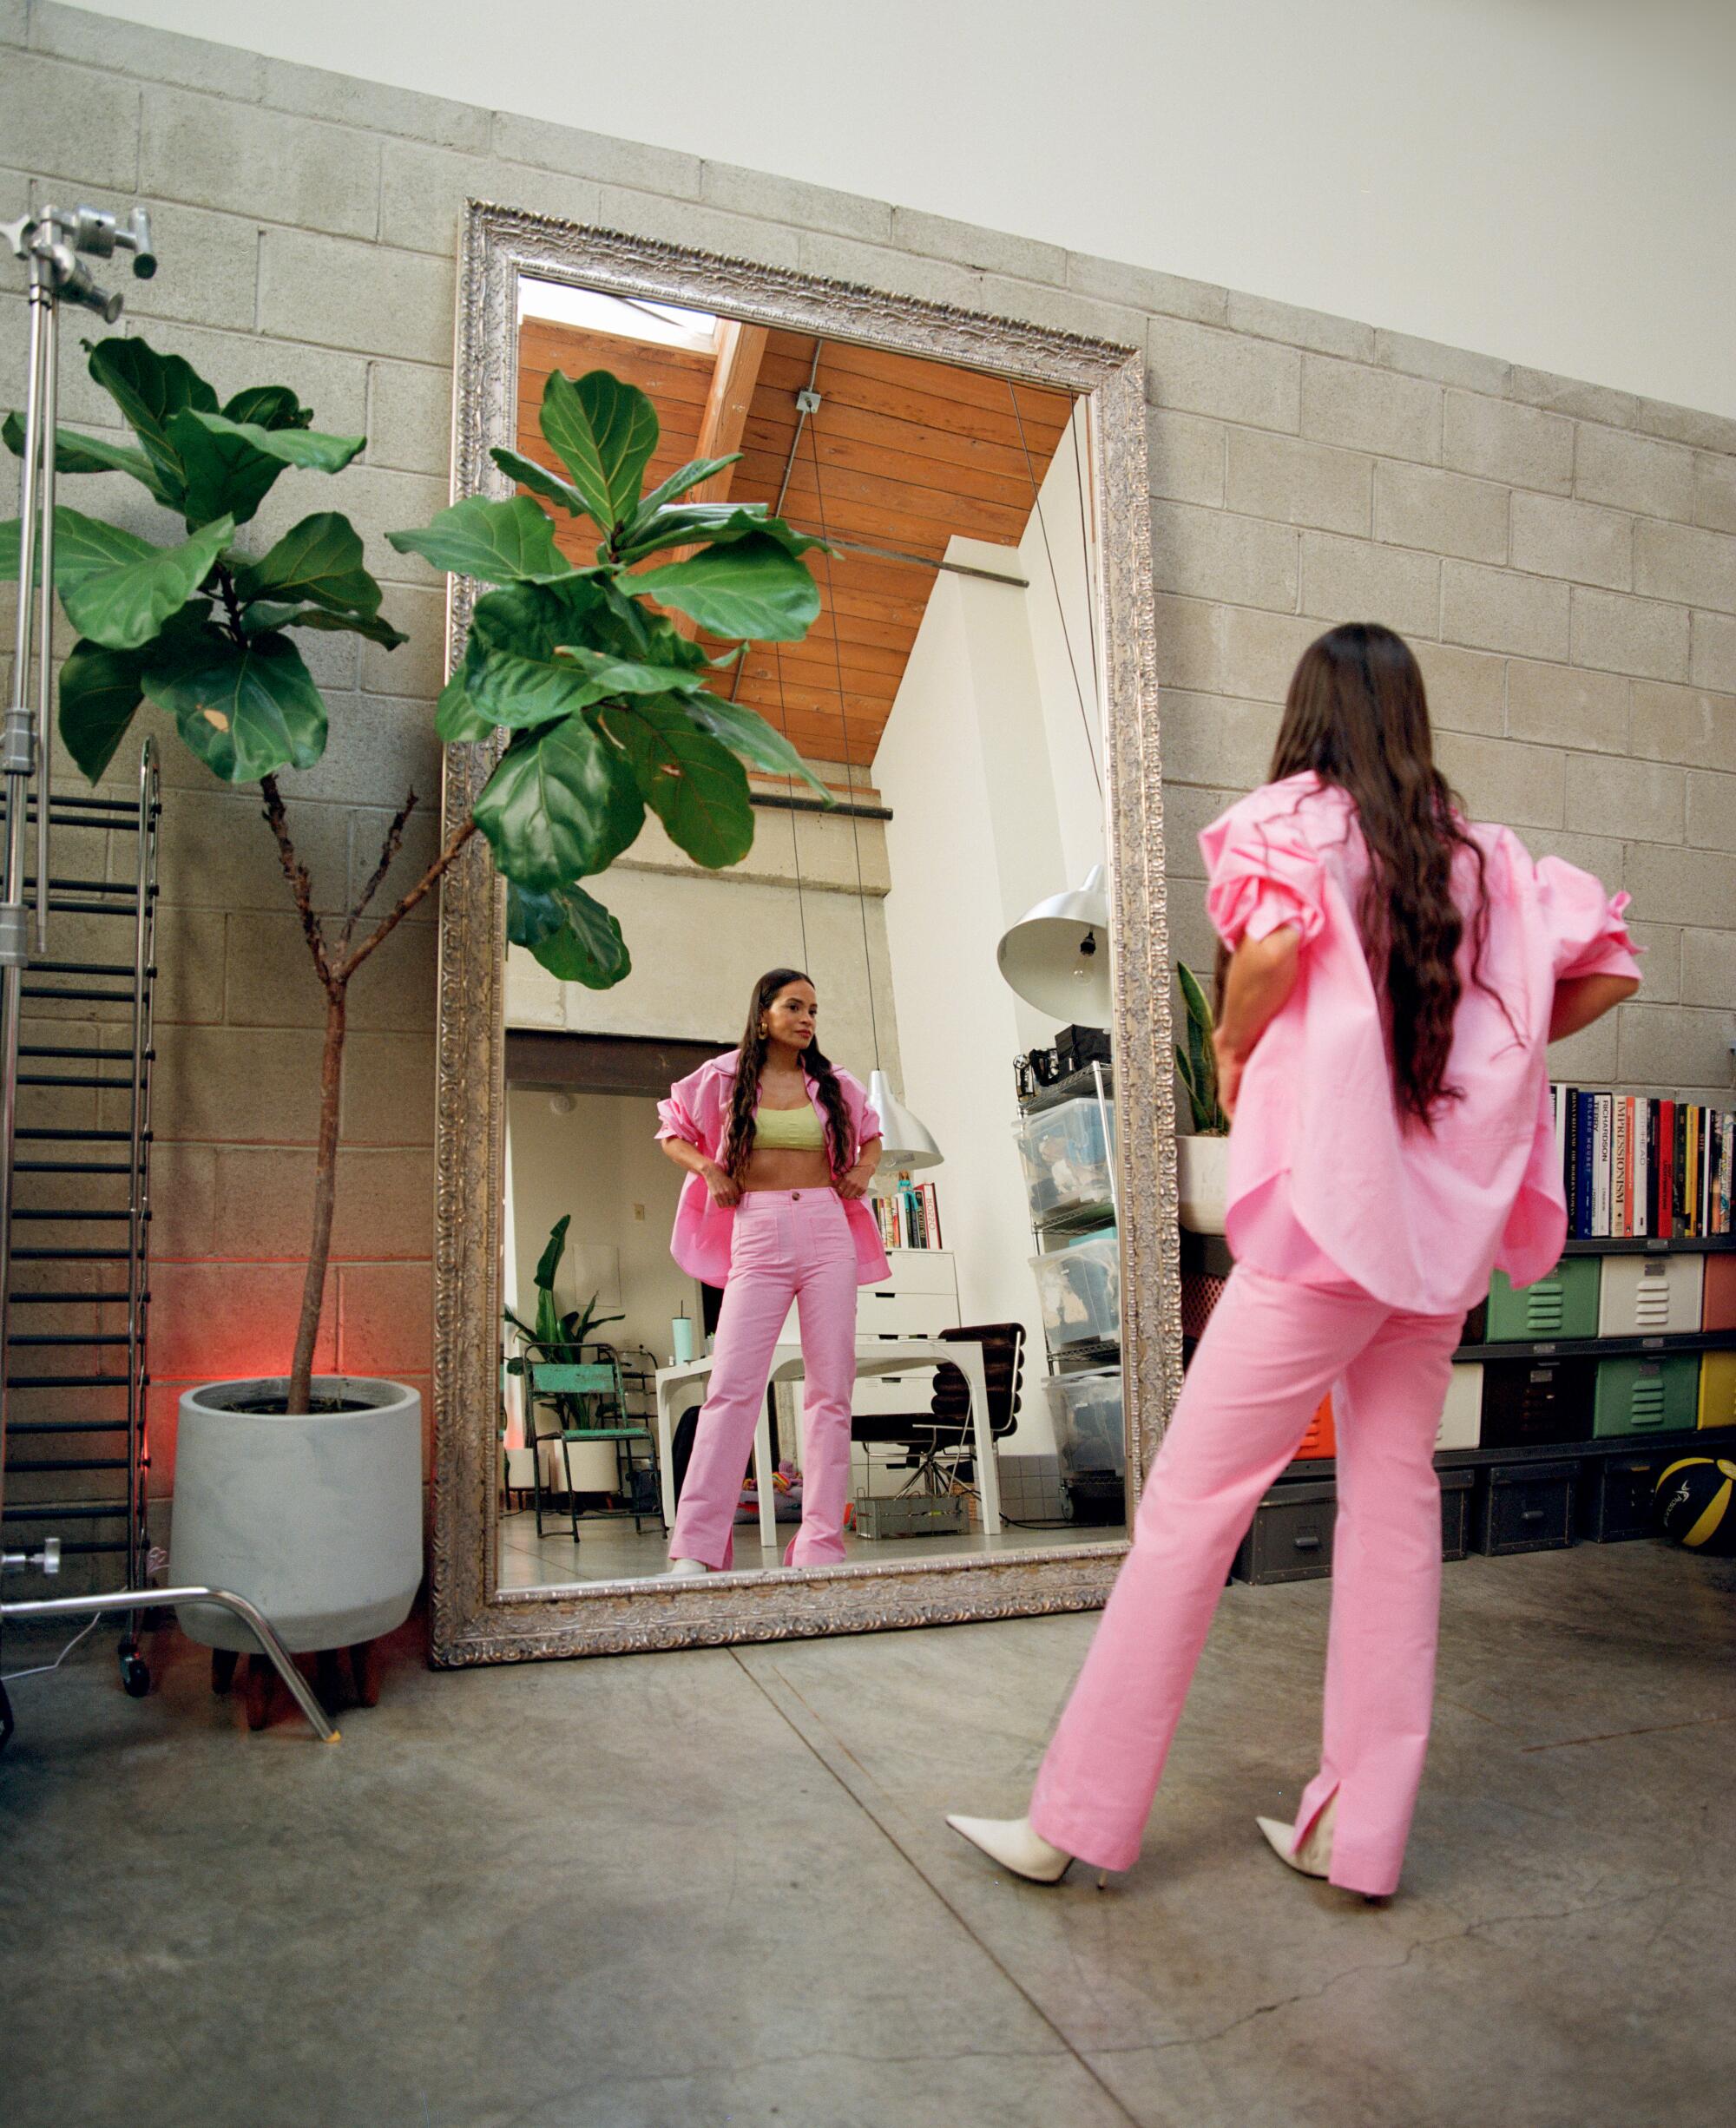 A woman in a pink jacket and pants looks at herself in a large mirror.